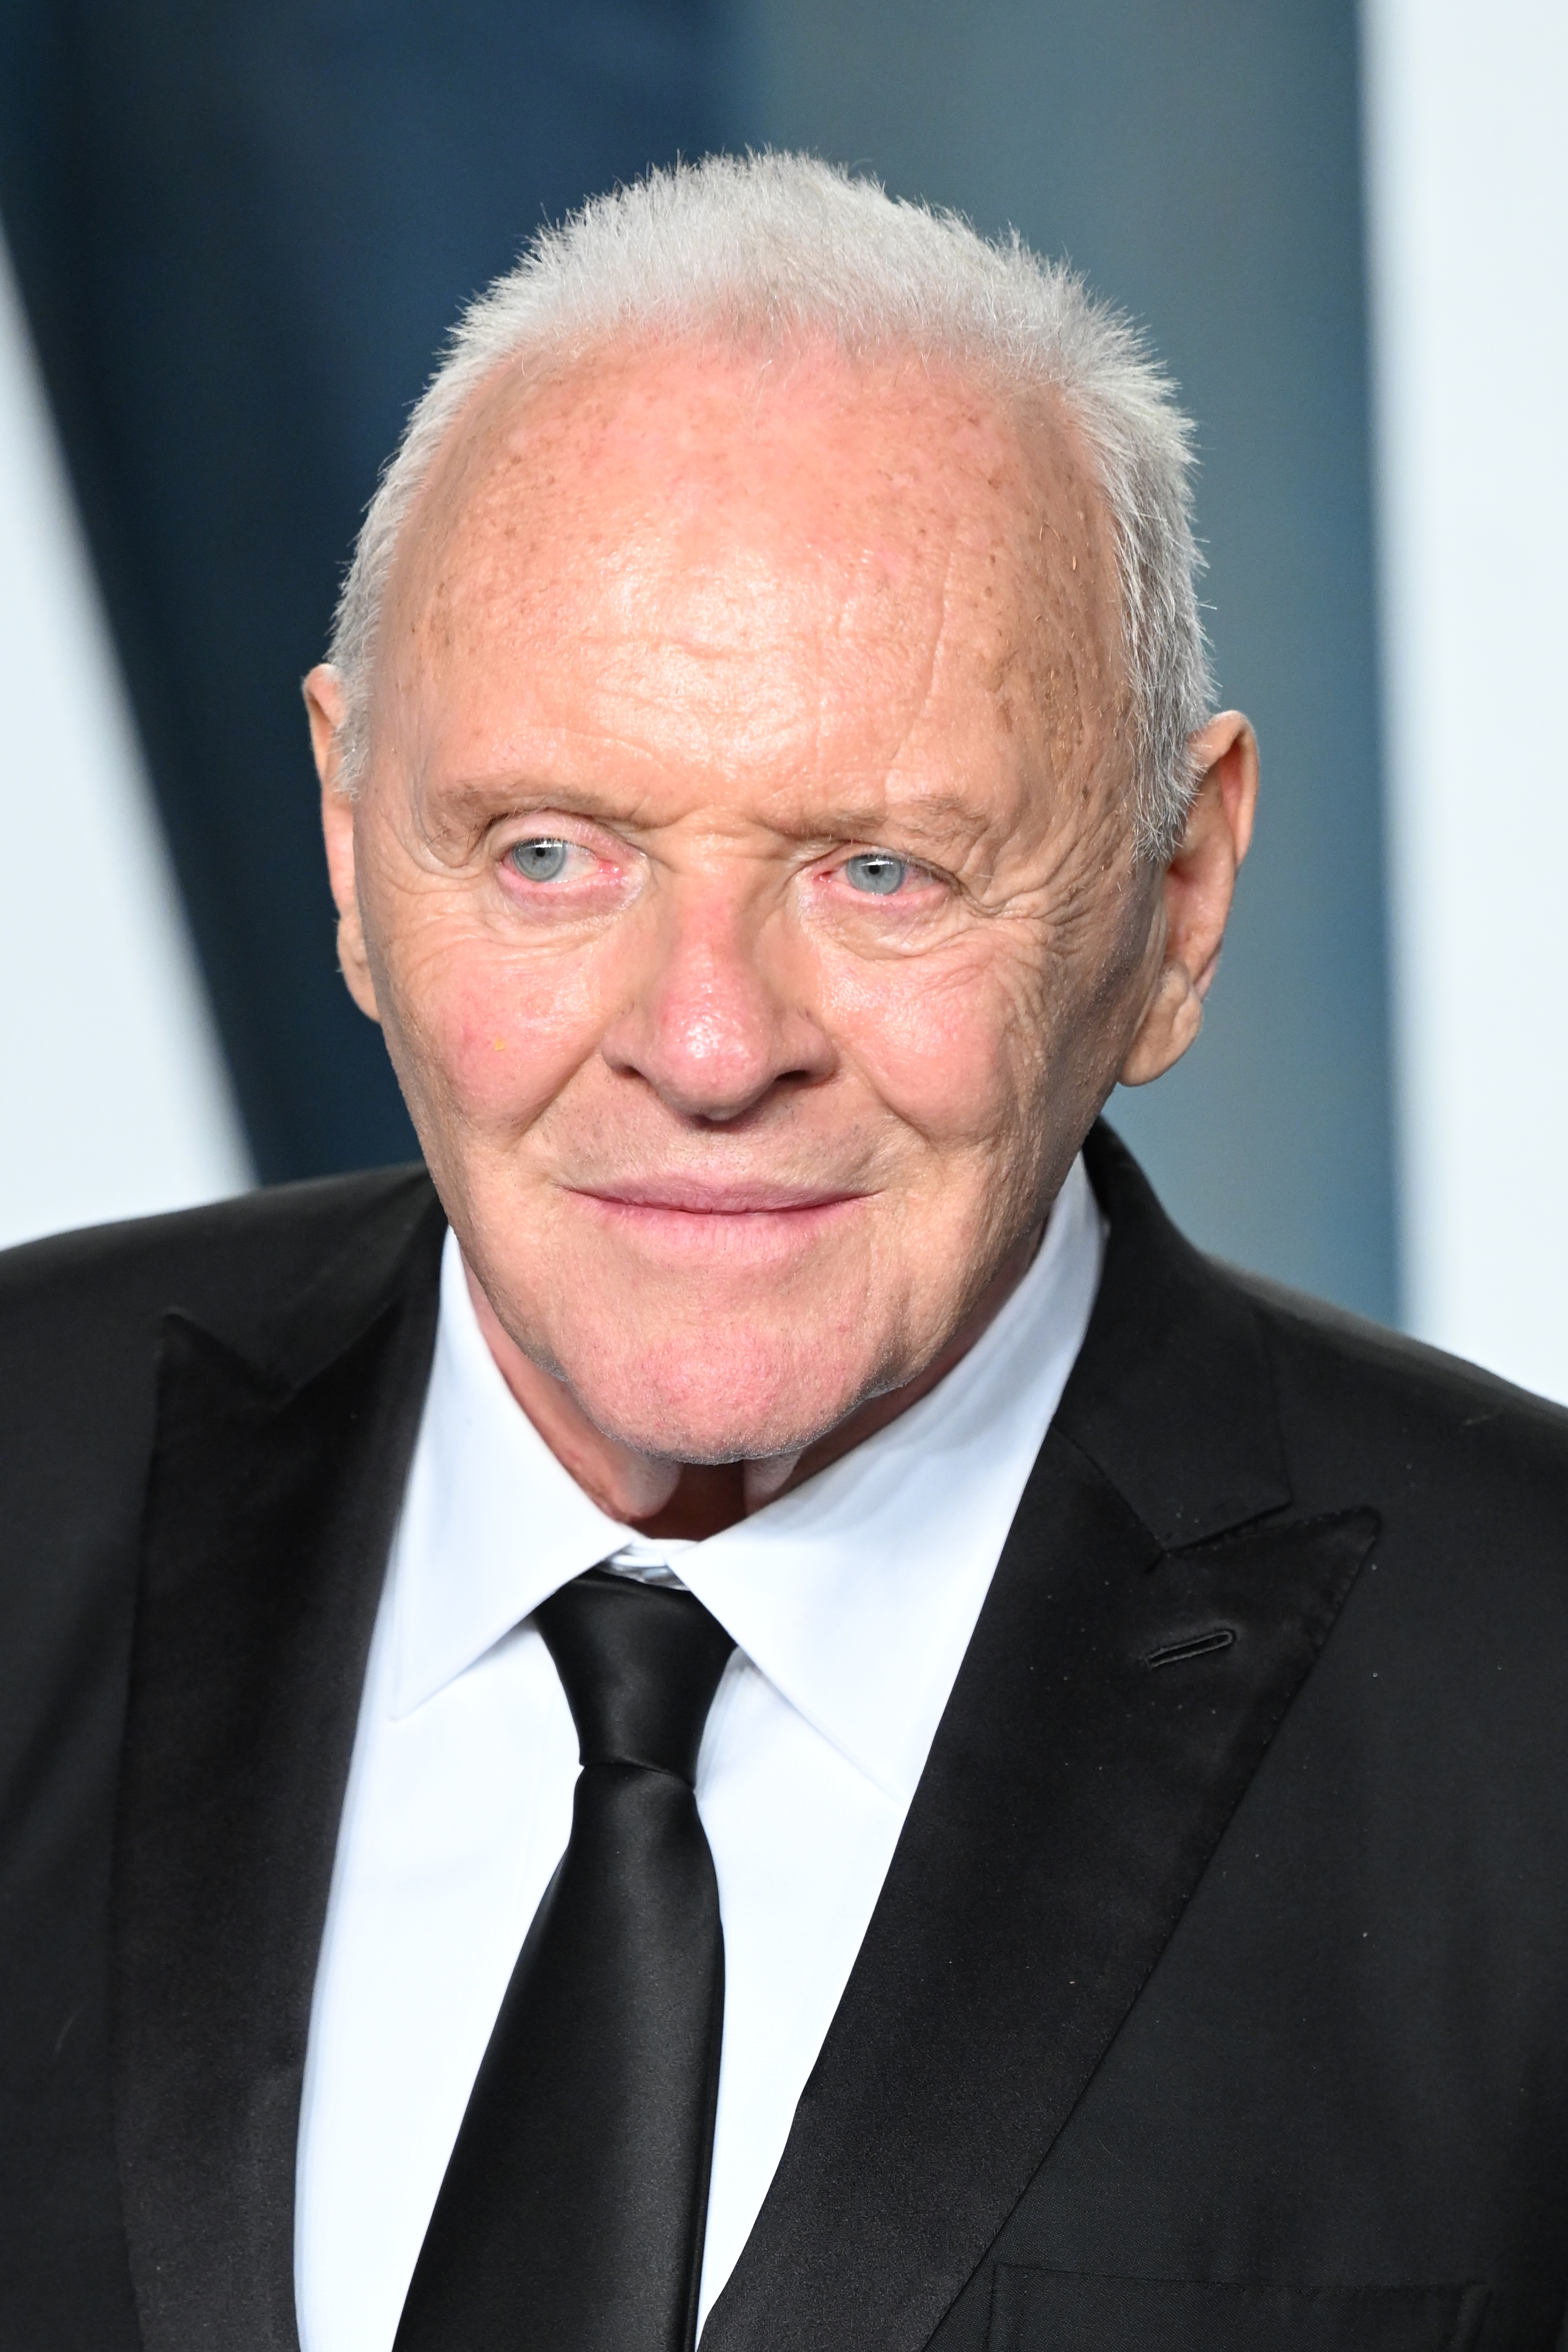 Anthony Hopkins attends 2022 Vanity Fair Oscar Party Hosted By Radhika Jones at Wallis Annenberg Center for the Performing Arts in Beverly Hills, California, on March 27, 2022. | Source: Getty Images